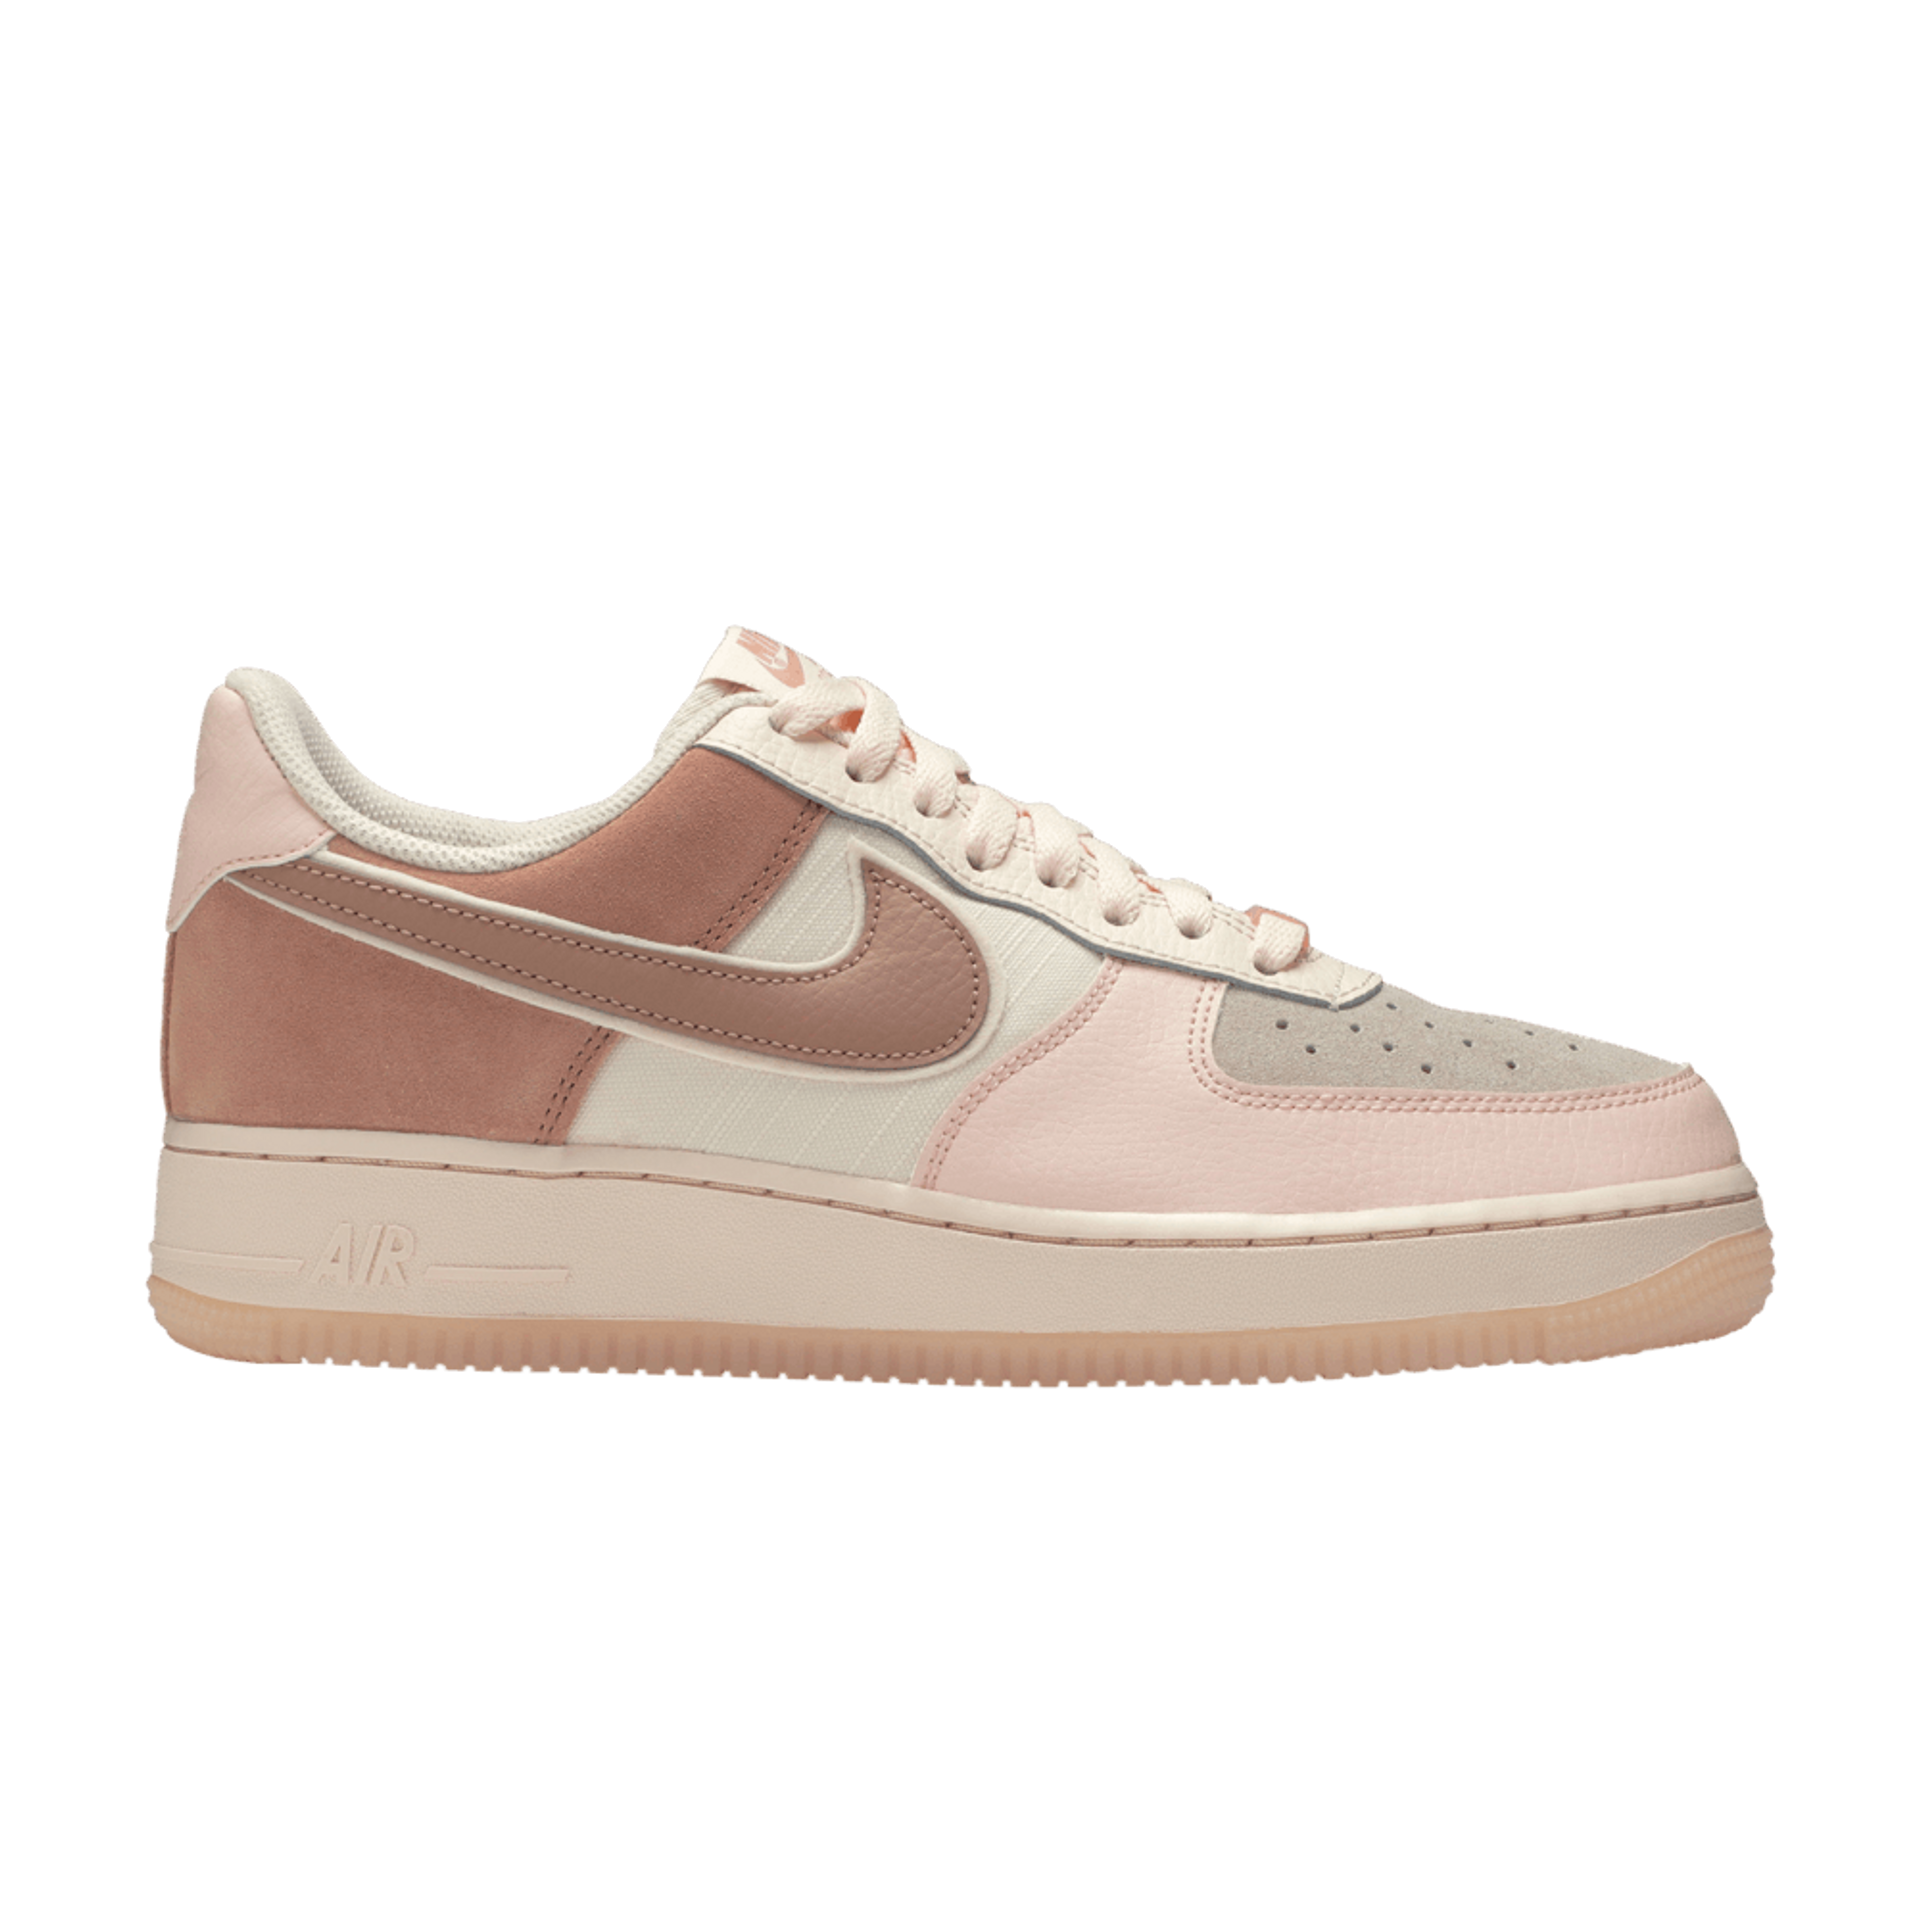 Nike Wmns Air Force 1 '07 Low Premium 'Washed Coral' - 896185 603 | Ox ...